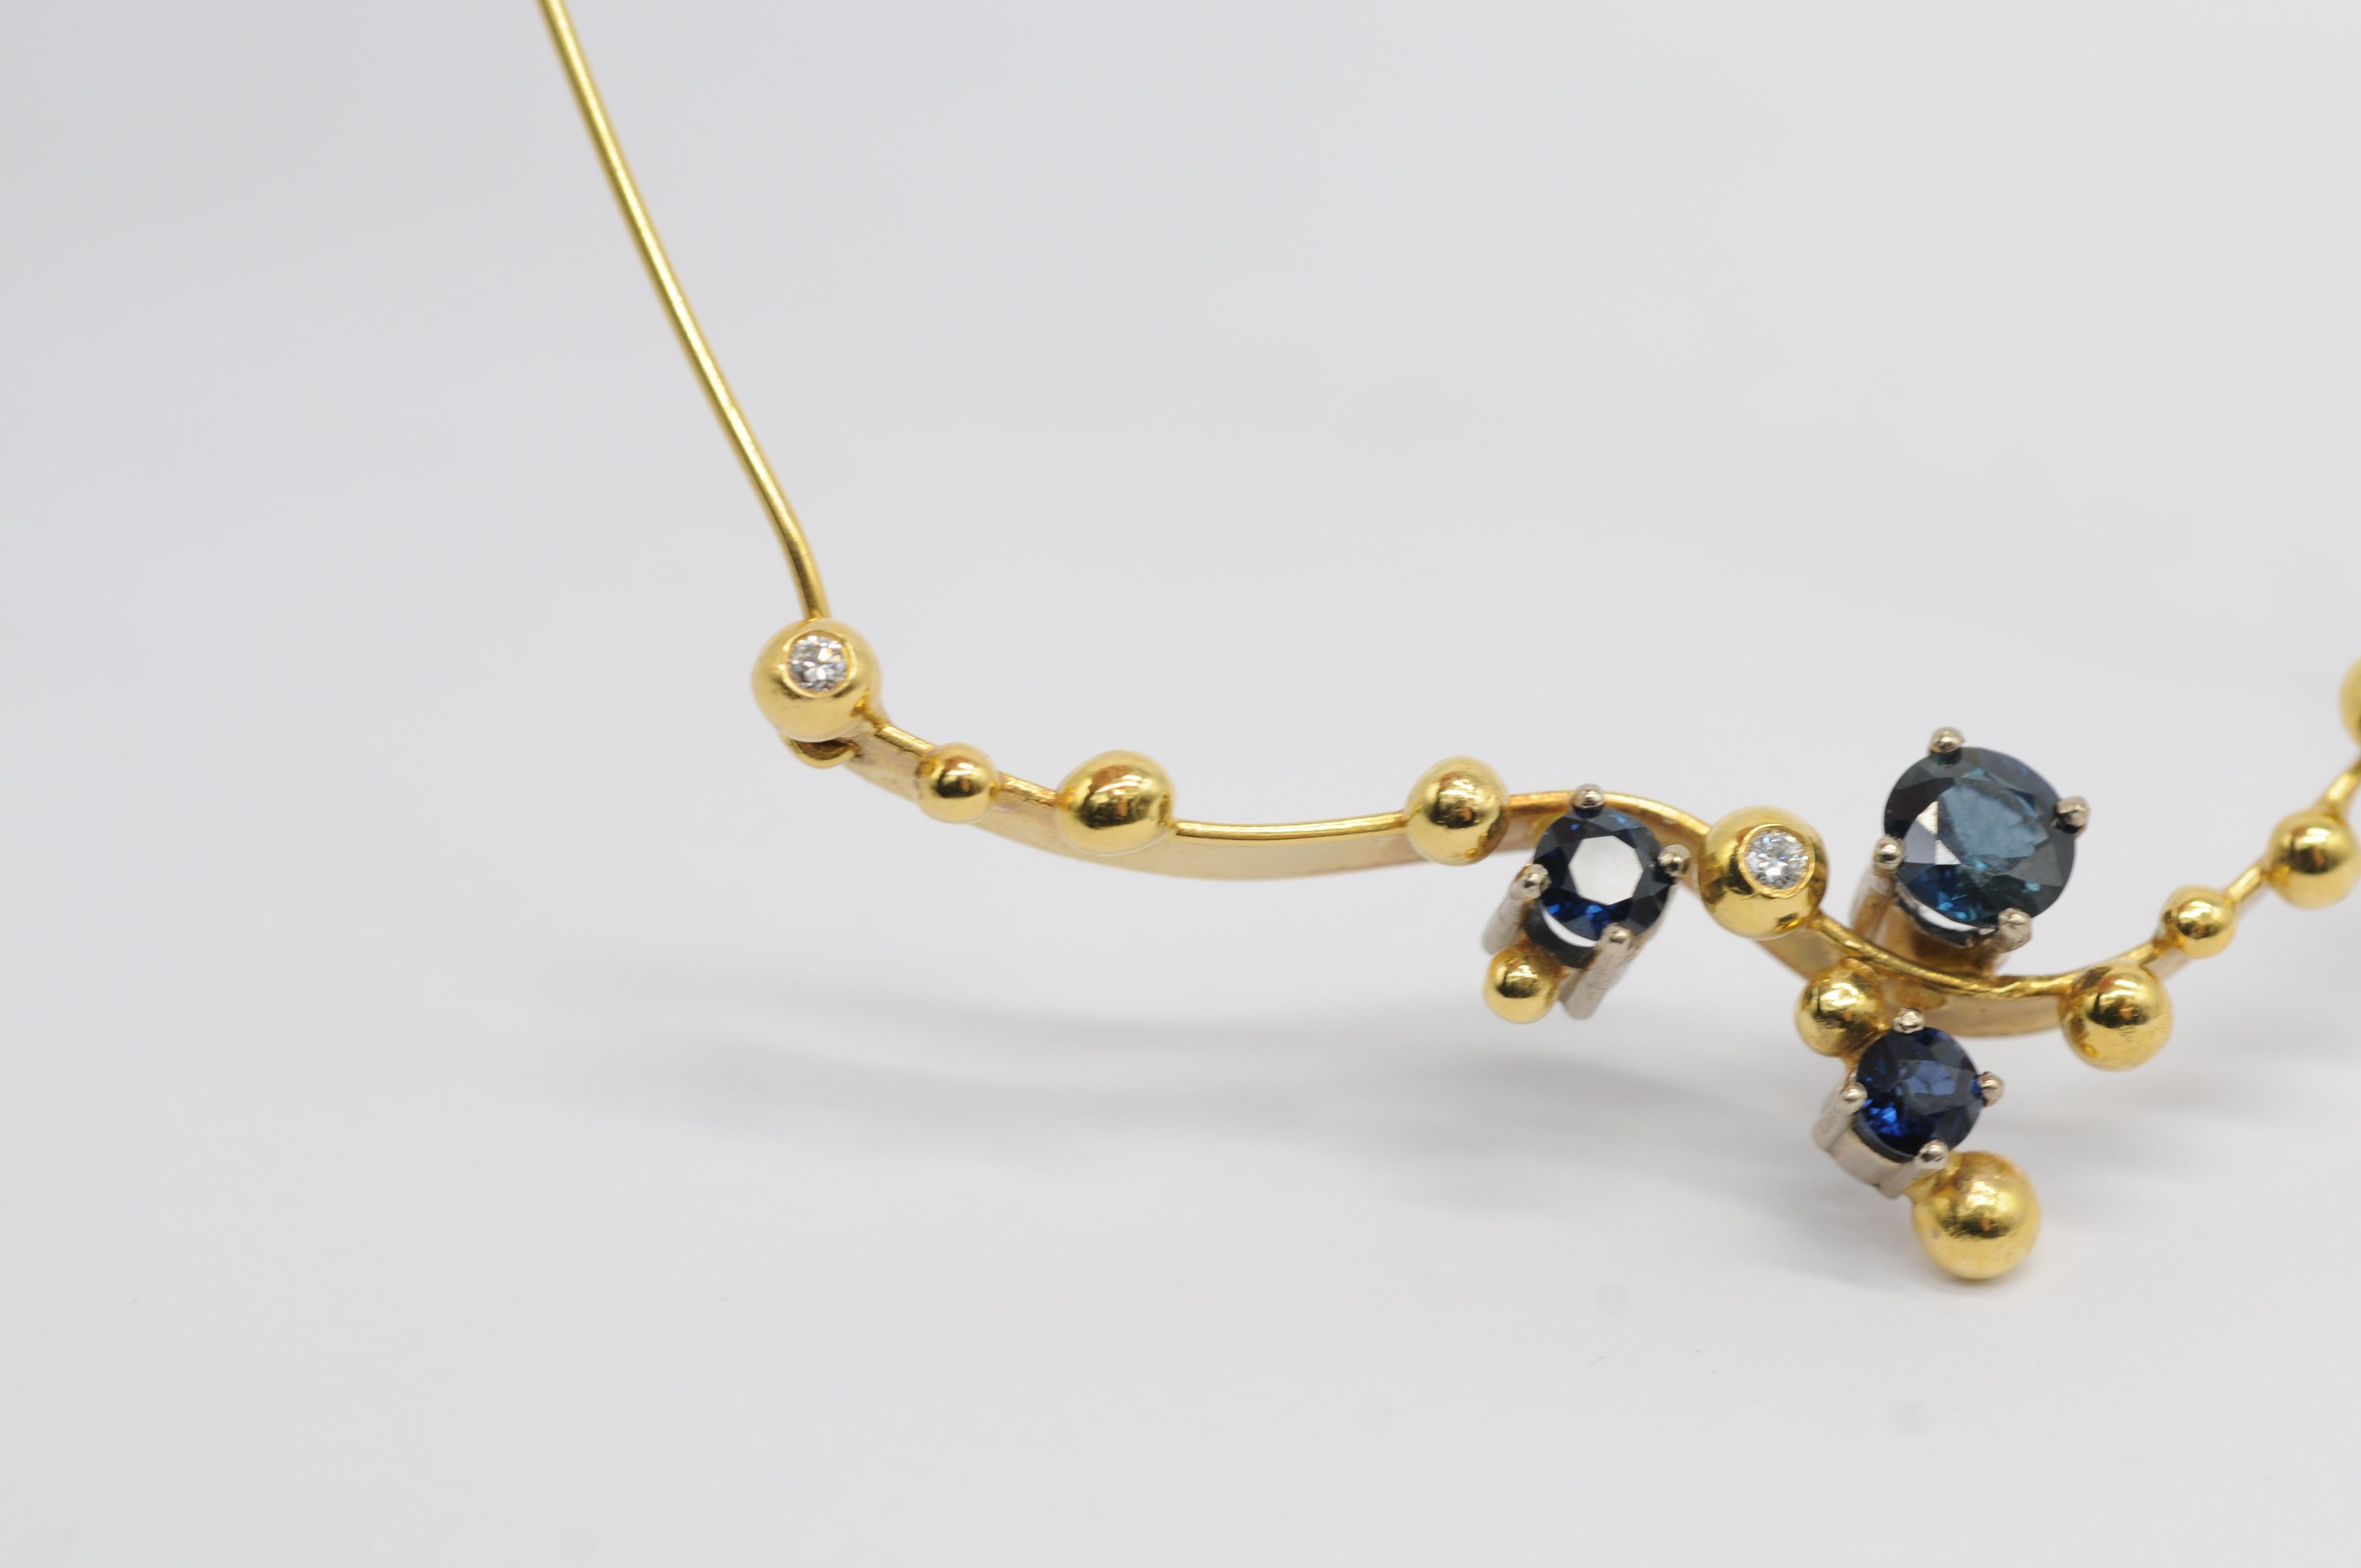 Majestic Necklace in 18k yellow gold with diamond and sapphire For Sale 1